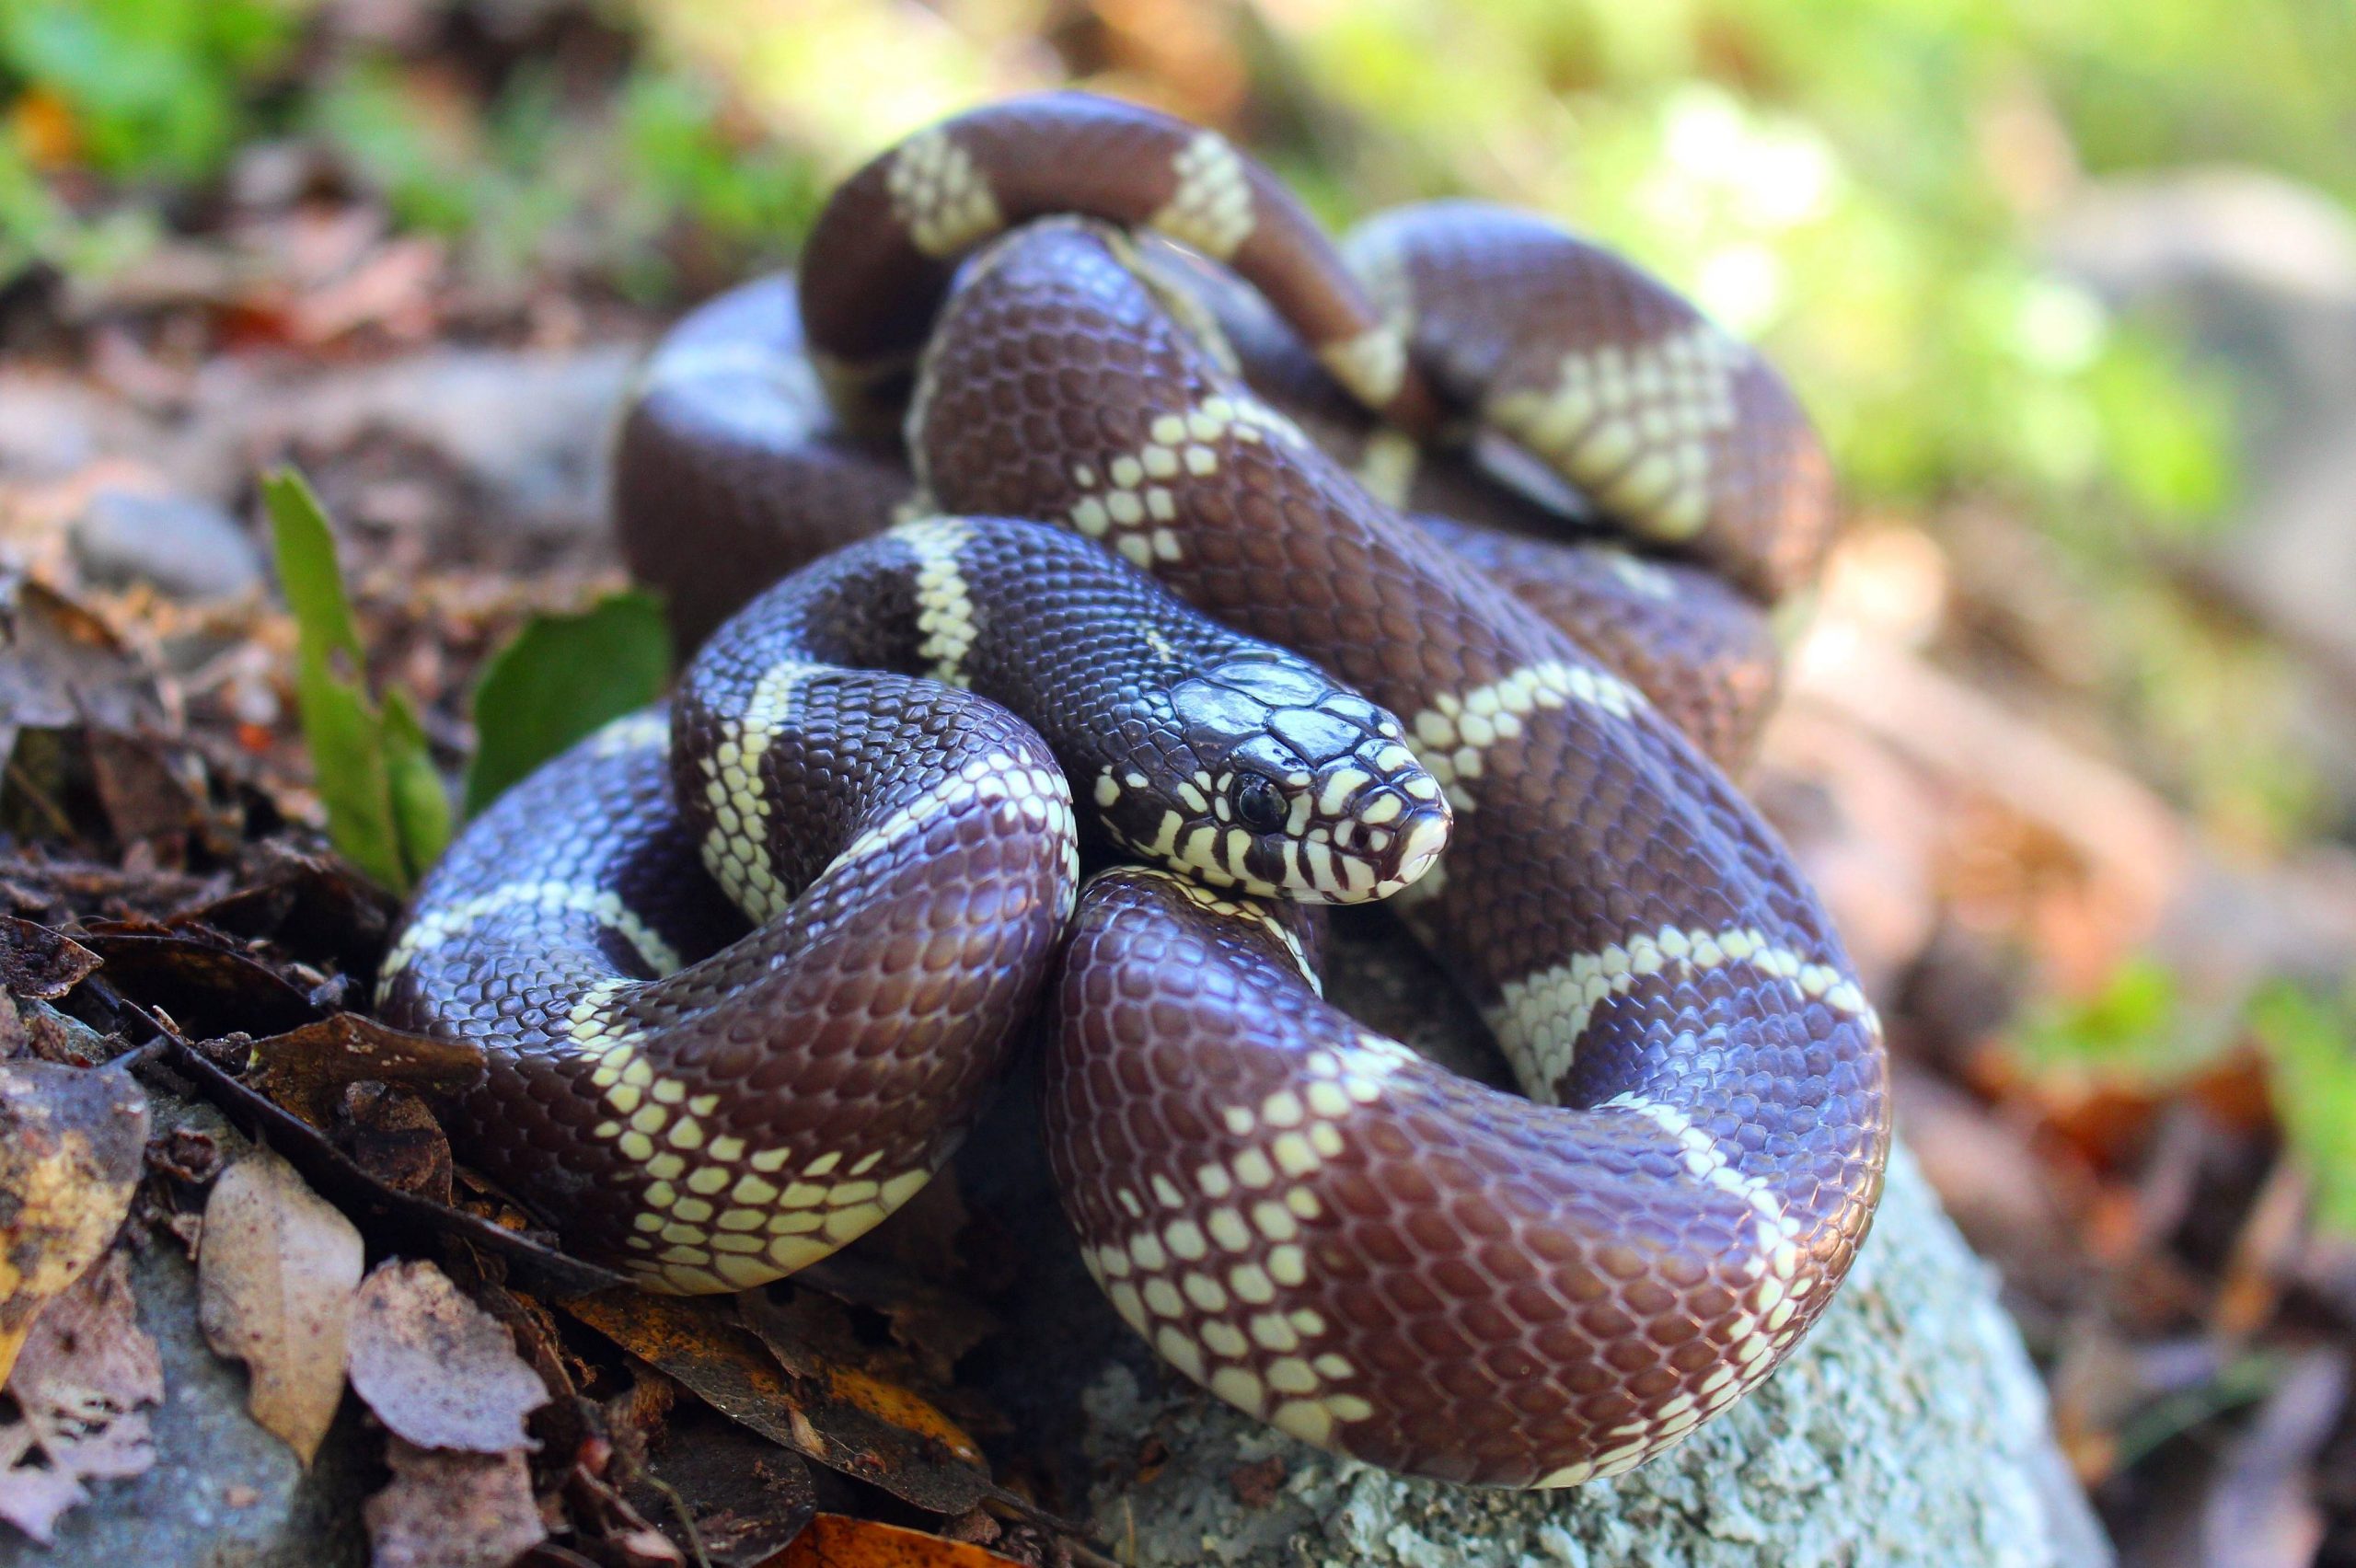 Knee-High Naturalists: All About Snakes!